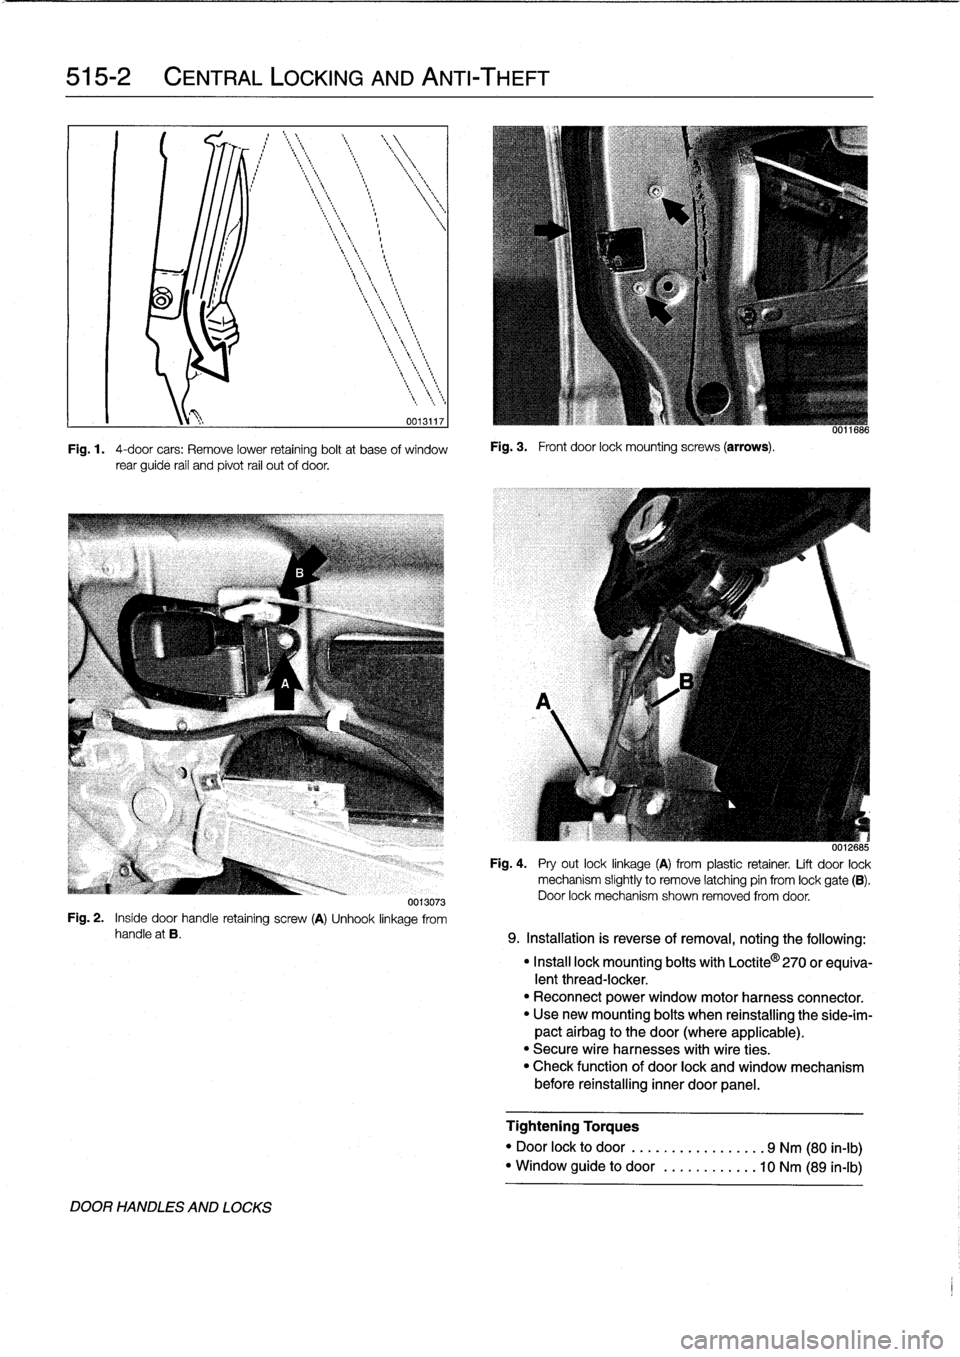 BMW 318i 1998 E36 Owners Manual 
515-2

	

CENTRAL
LOCKING
AND
ANTI-THEFT

0013117

Fig
.
1
.

	

4-door
cars
:
Remove
lower
retaining
boltat
base
of
window
rear
guide
rail
and
pivot
rail
out
of
door
.

Fig
.
3
.

	

Front
door
lock